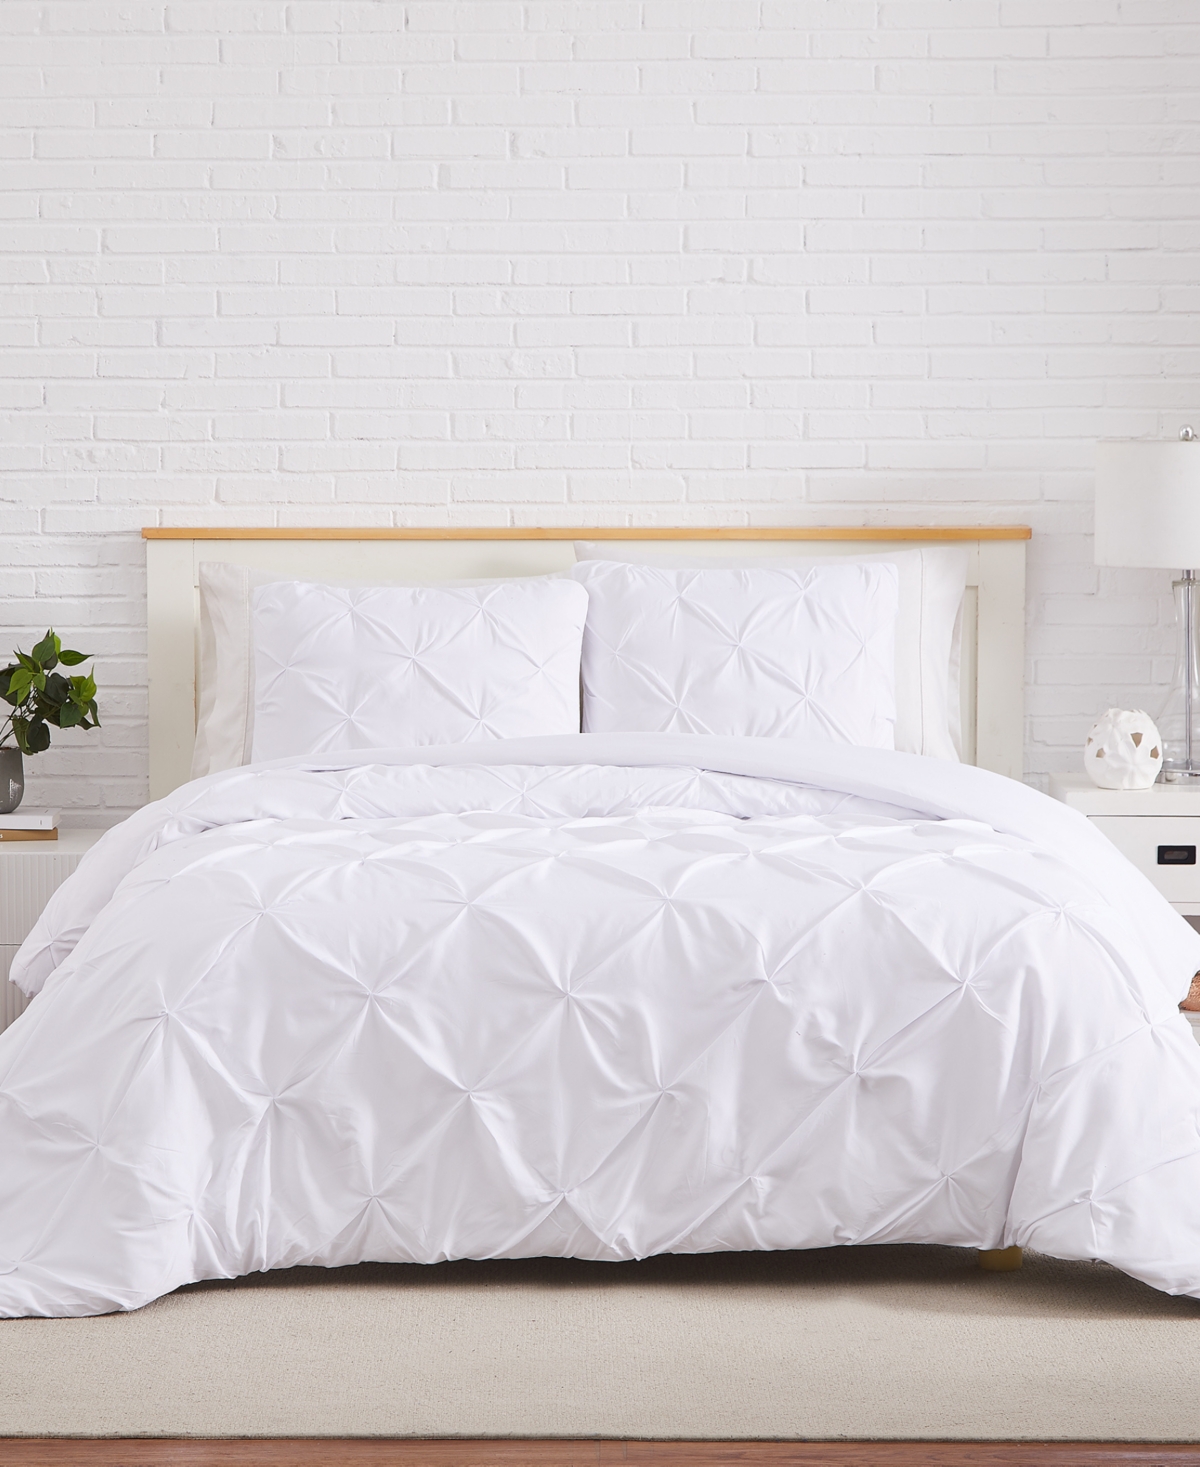 Southshore Fine Linens Pintuck 3 Piece Duvet Cover And Sham Set, King/california King In White